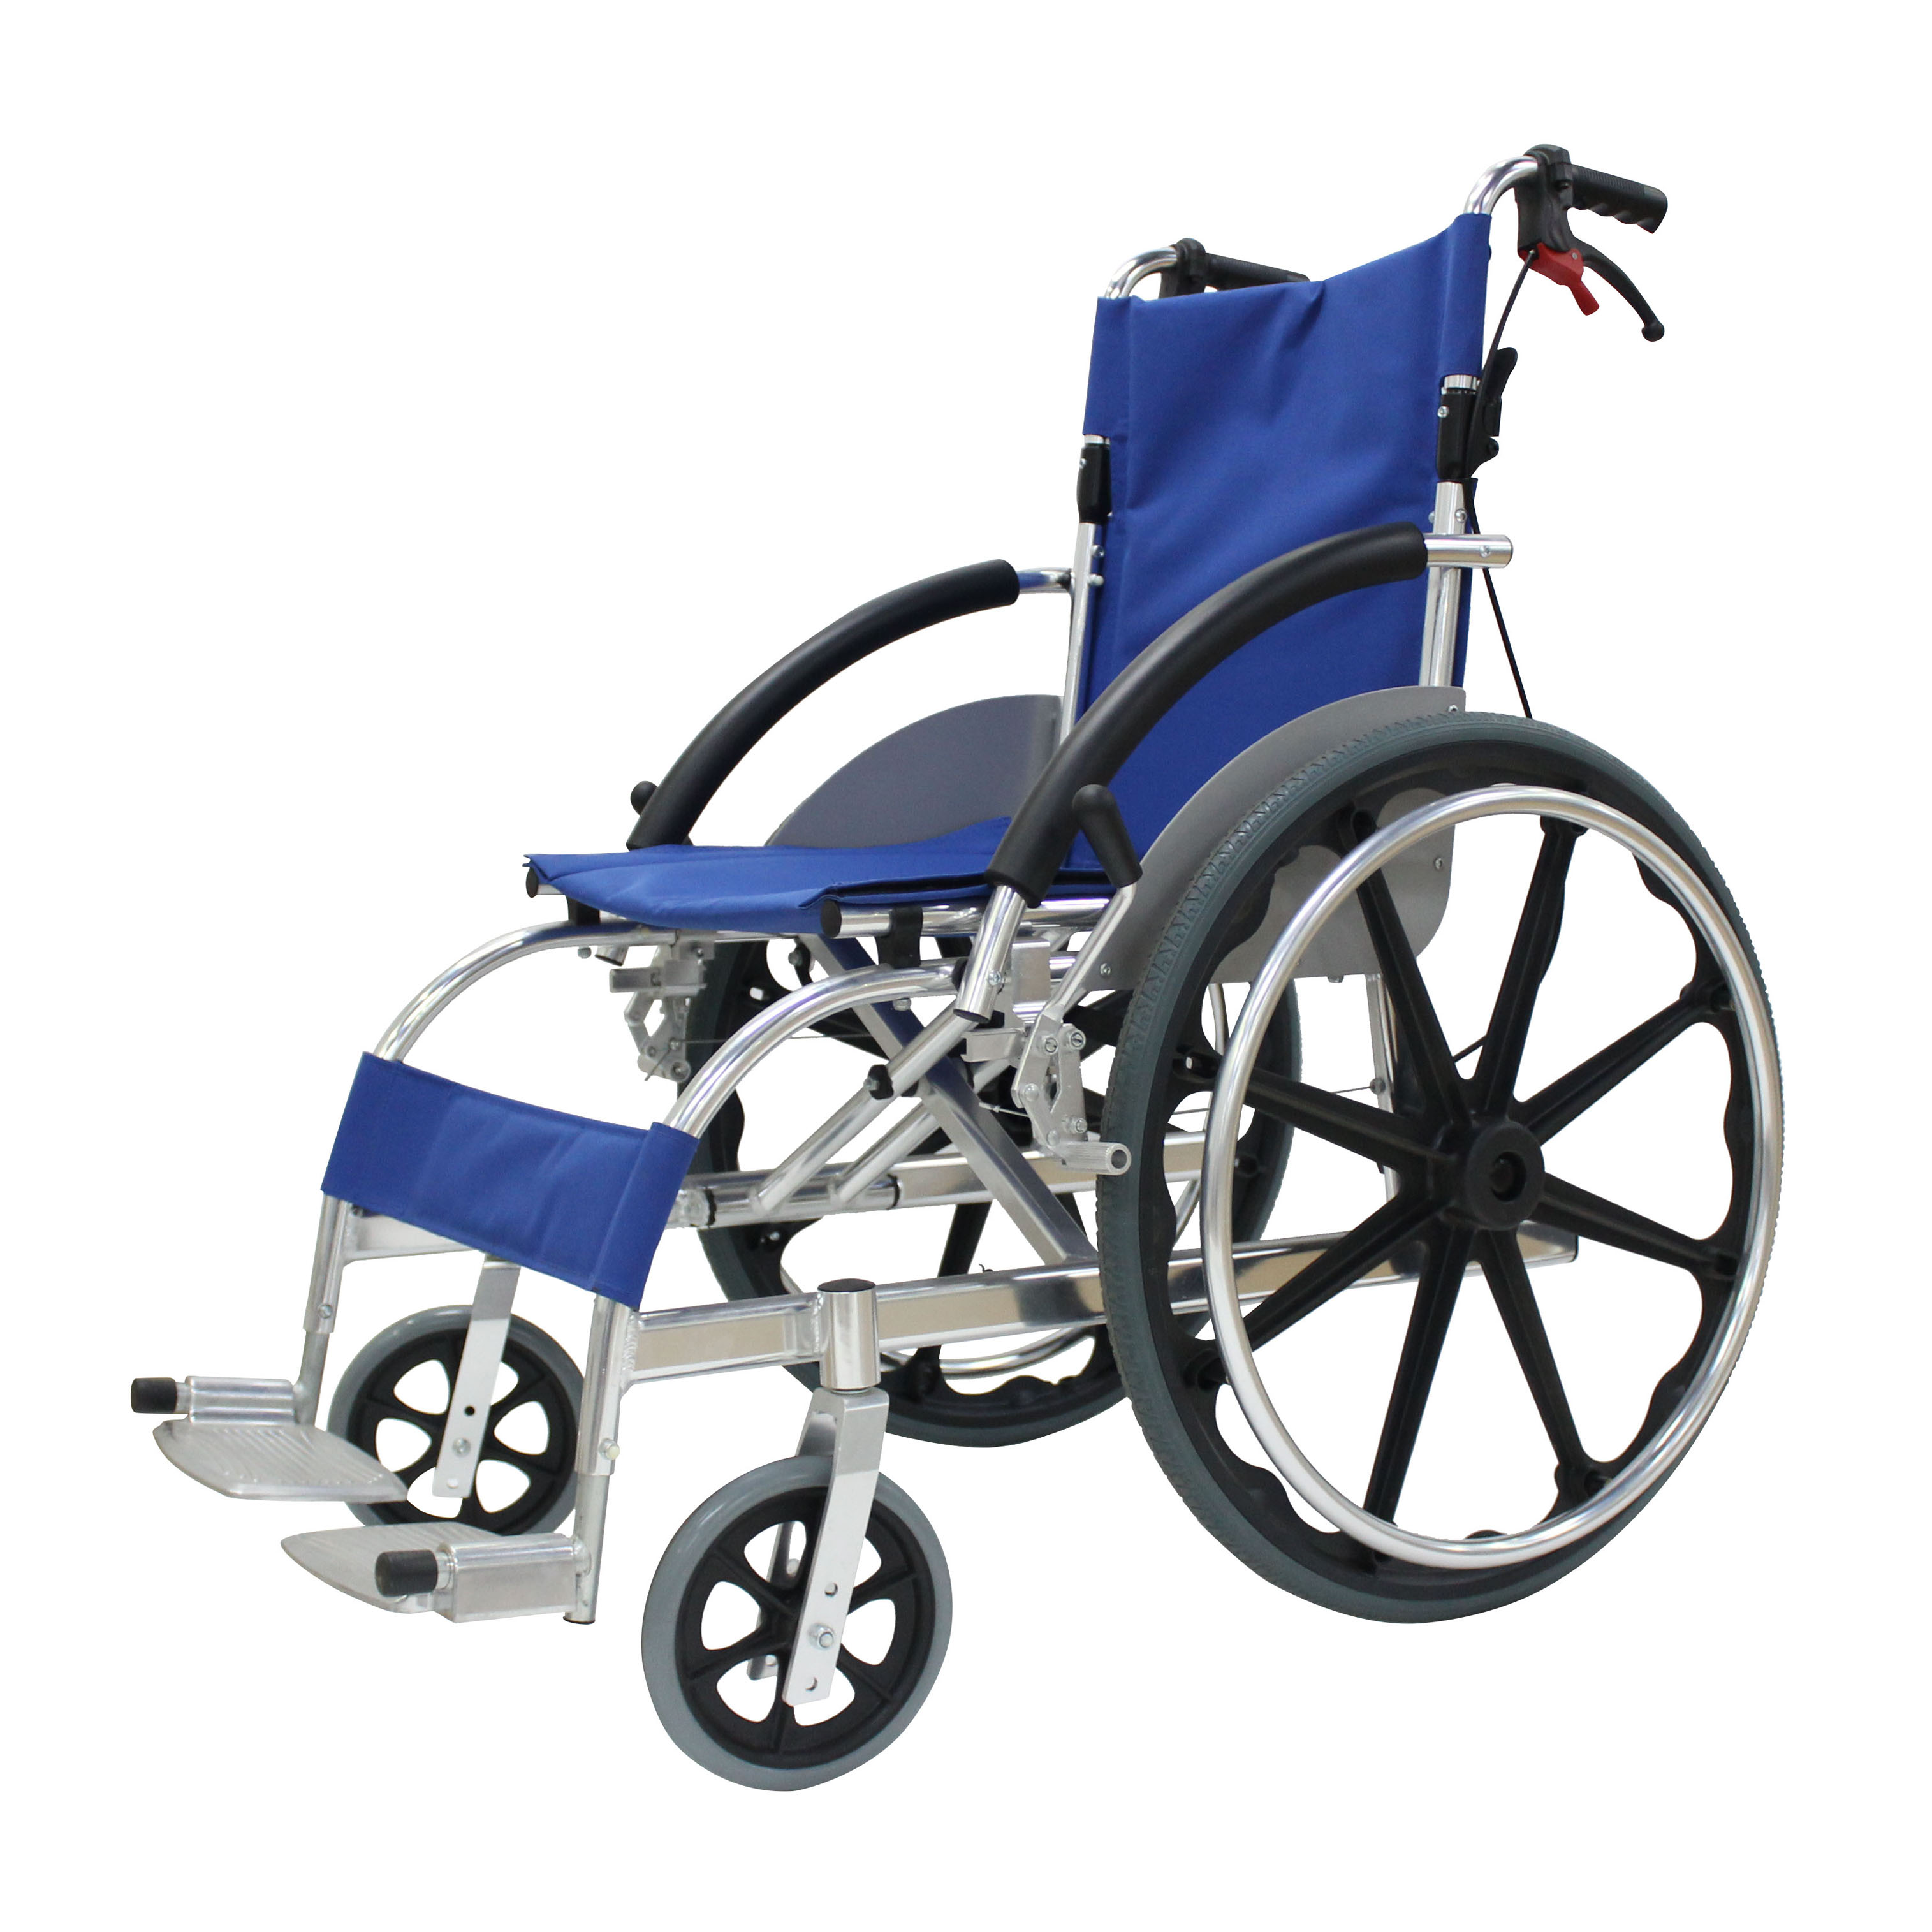 Top selling products Physical Therapy Equipment Aluminum walker wheel chair manual wheelchair for disabled